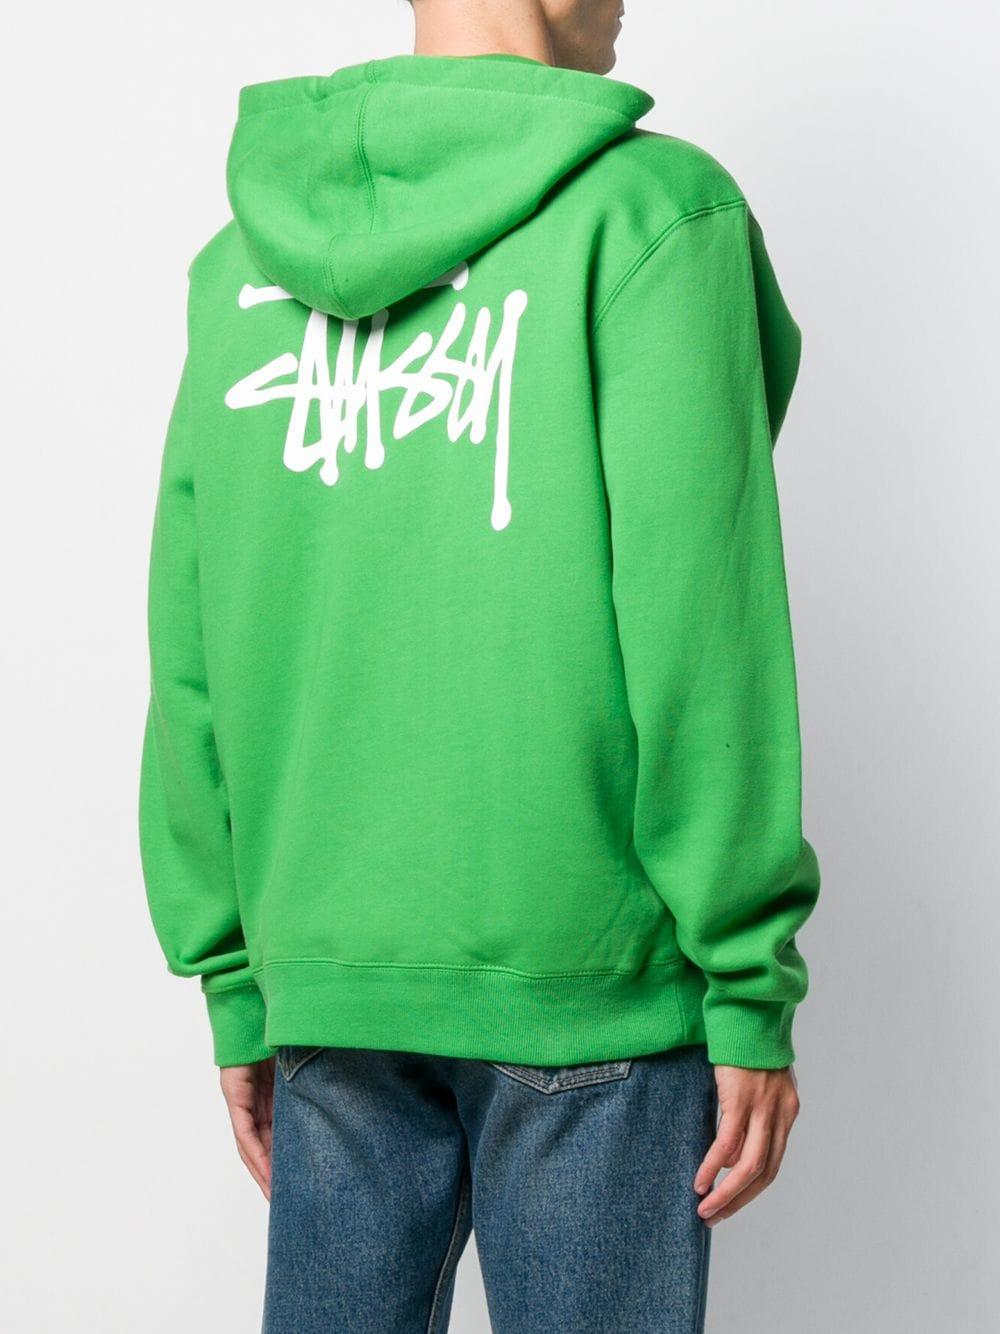 Stussy Cotton Kelly Zipped Hoodie in Green for Men - Lyst